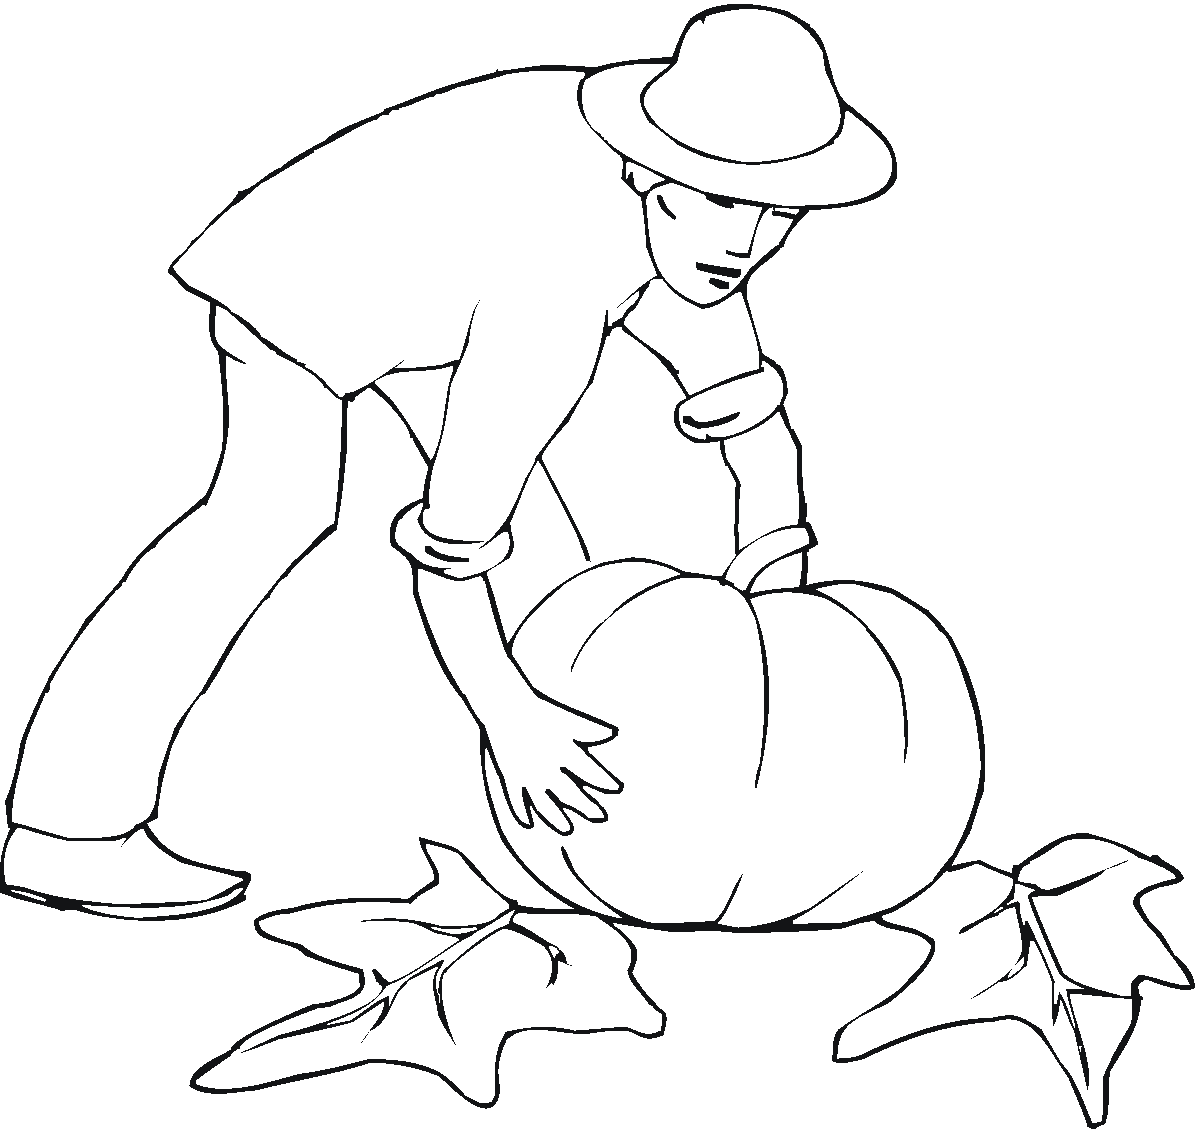 images of pumpkins to color free printable pumpkin coloring pages for kids of to images pumpkins color 